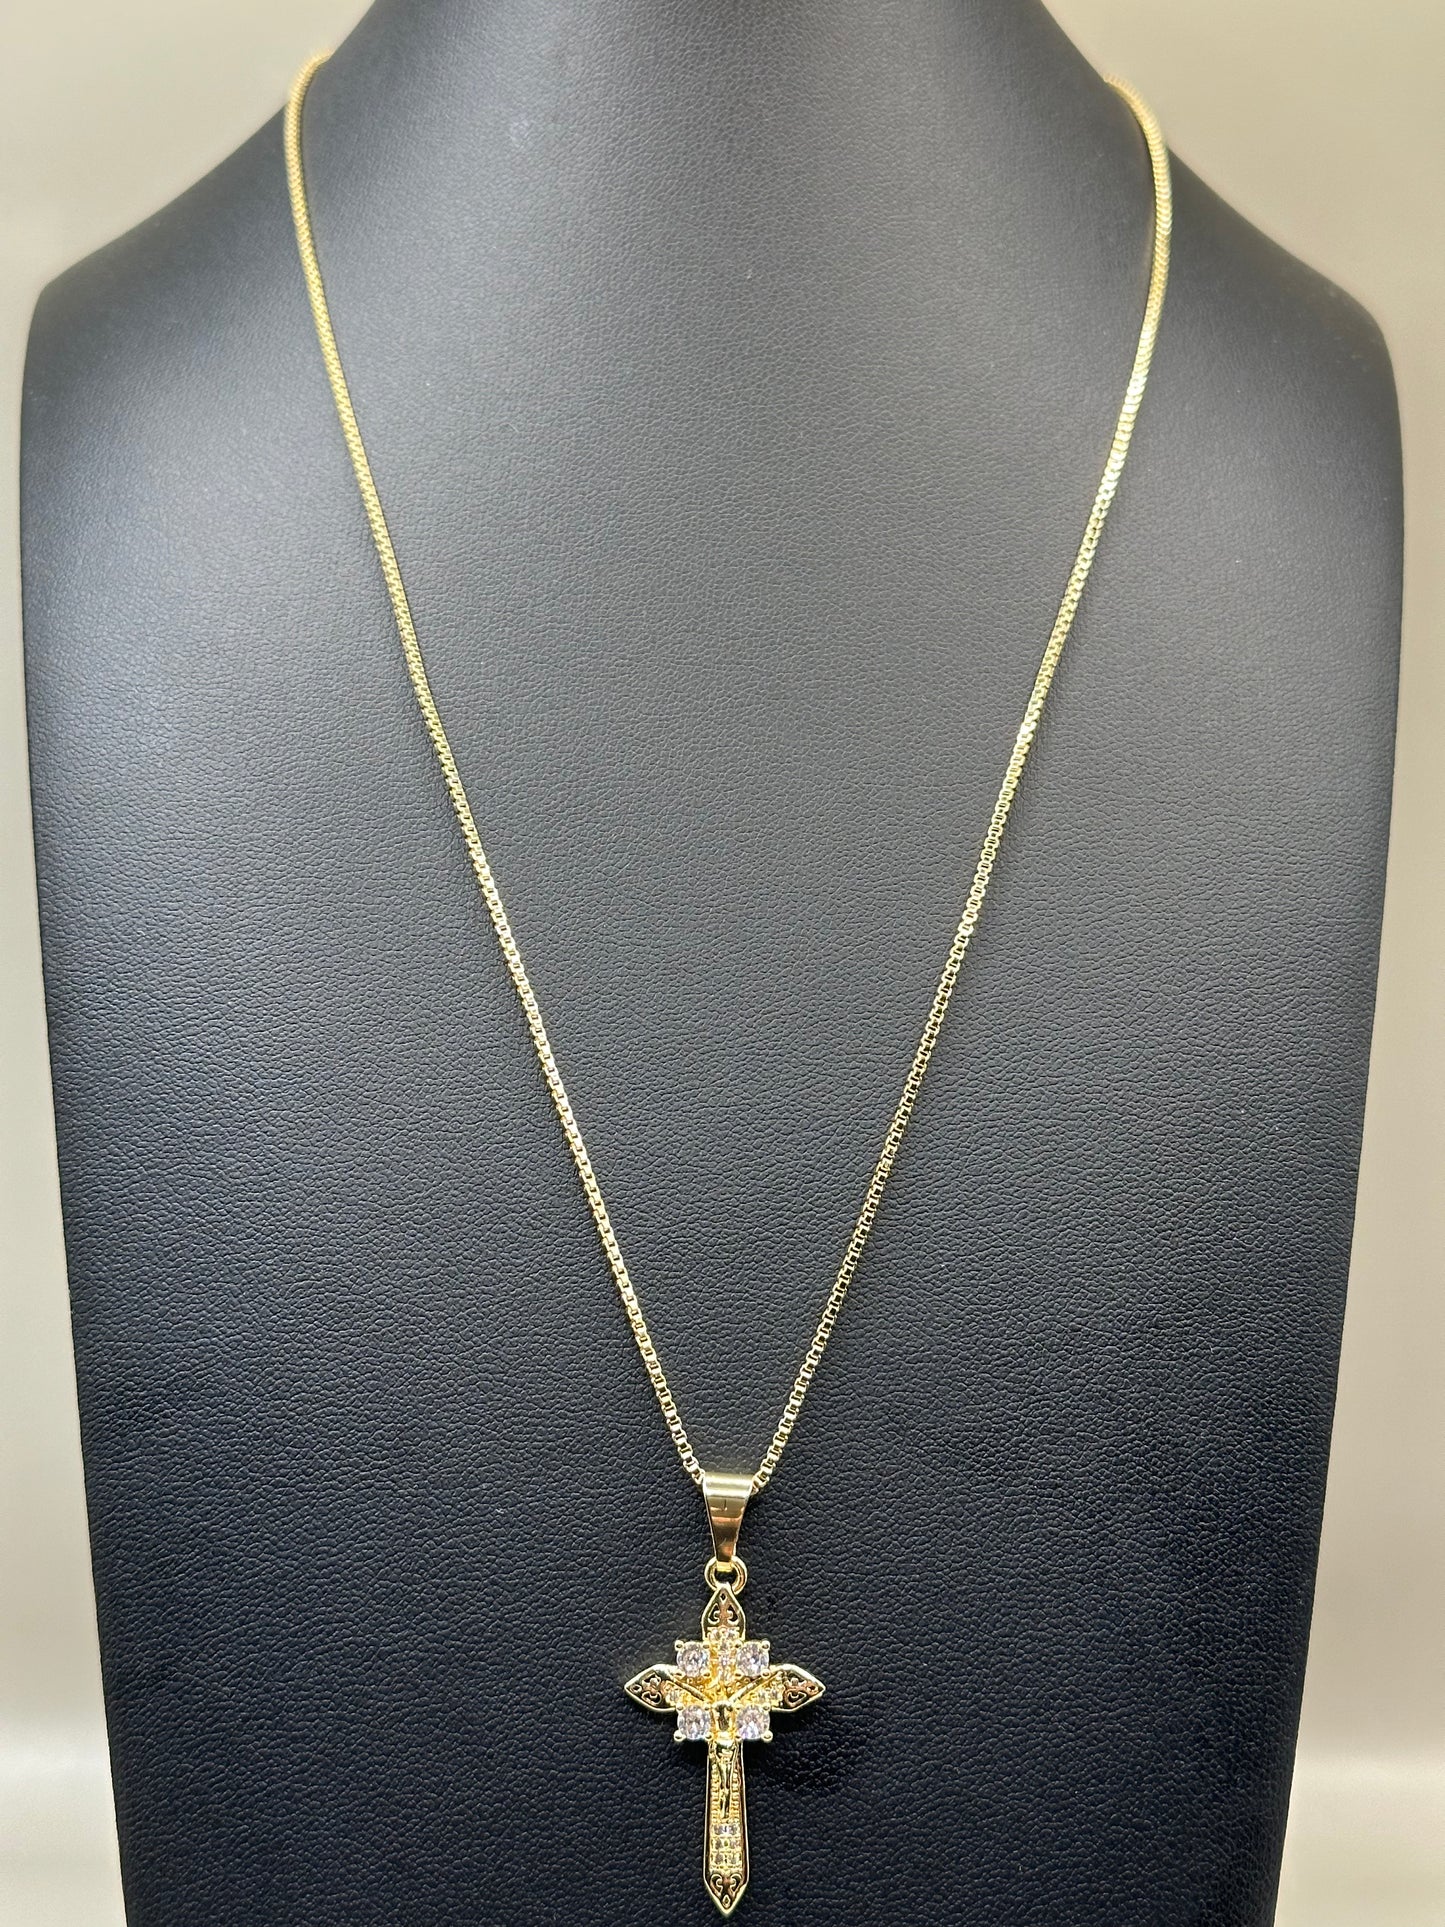 18k Gold-Filled Box Chain with Cross Pendant